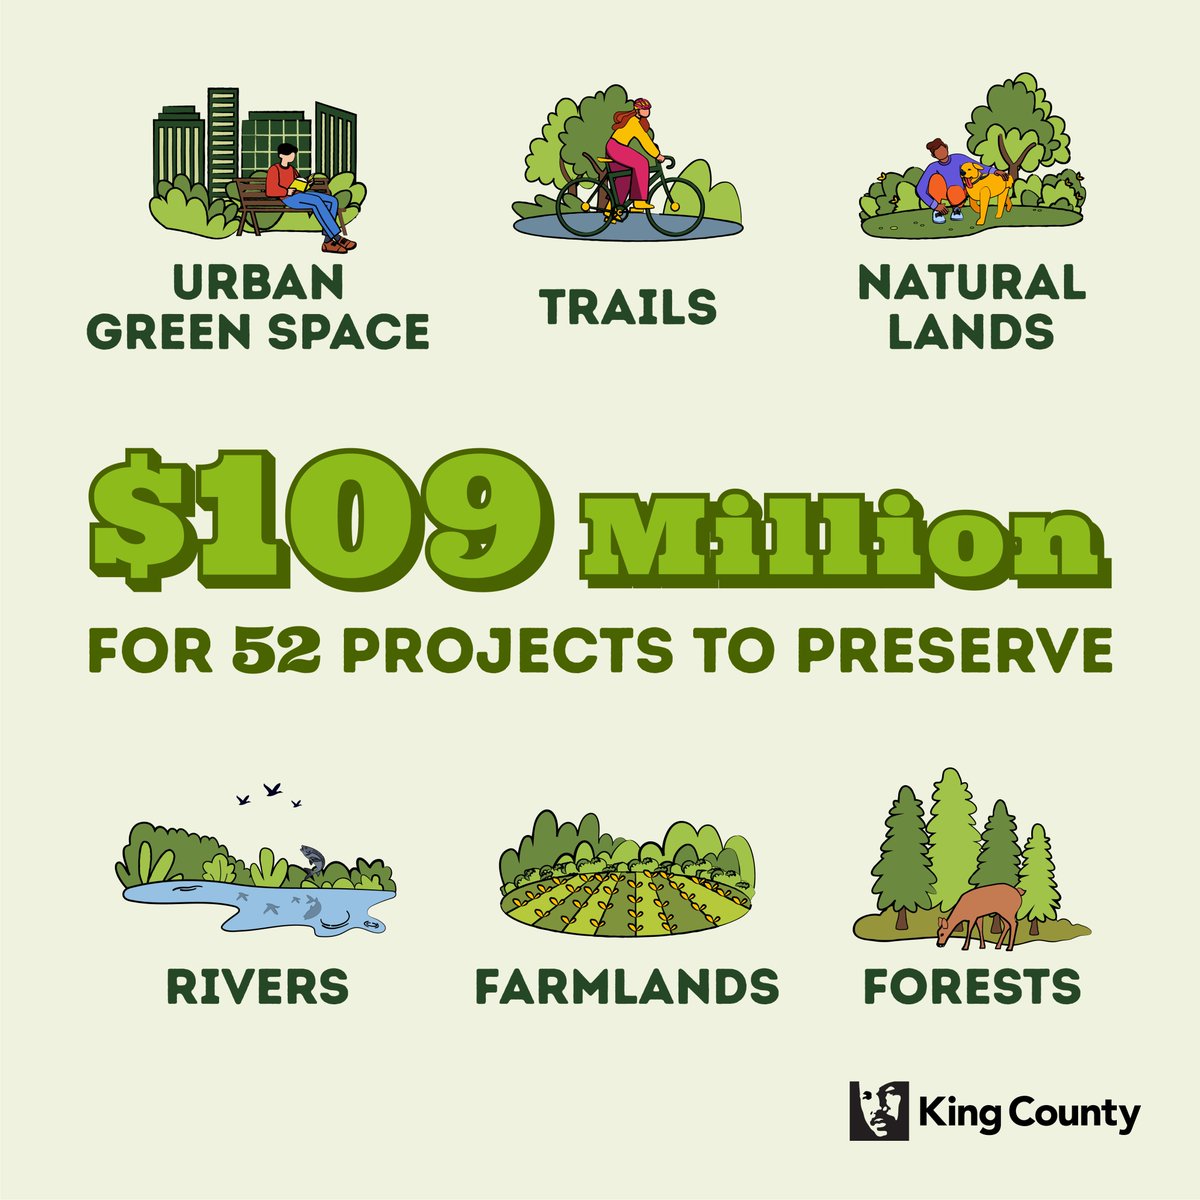 We’re providing $109 million to fund 52 open space preservation projects, protecting 3,000 acres! It’s double the amount we announced in 2022 thanks to voters approving @kcexec's proposal that restored our Conservation Futures Program to its original rate. bit.ly/3Tconww